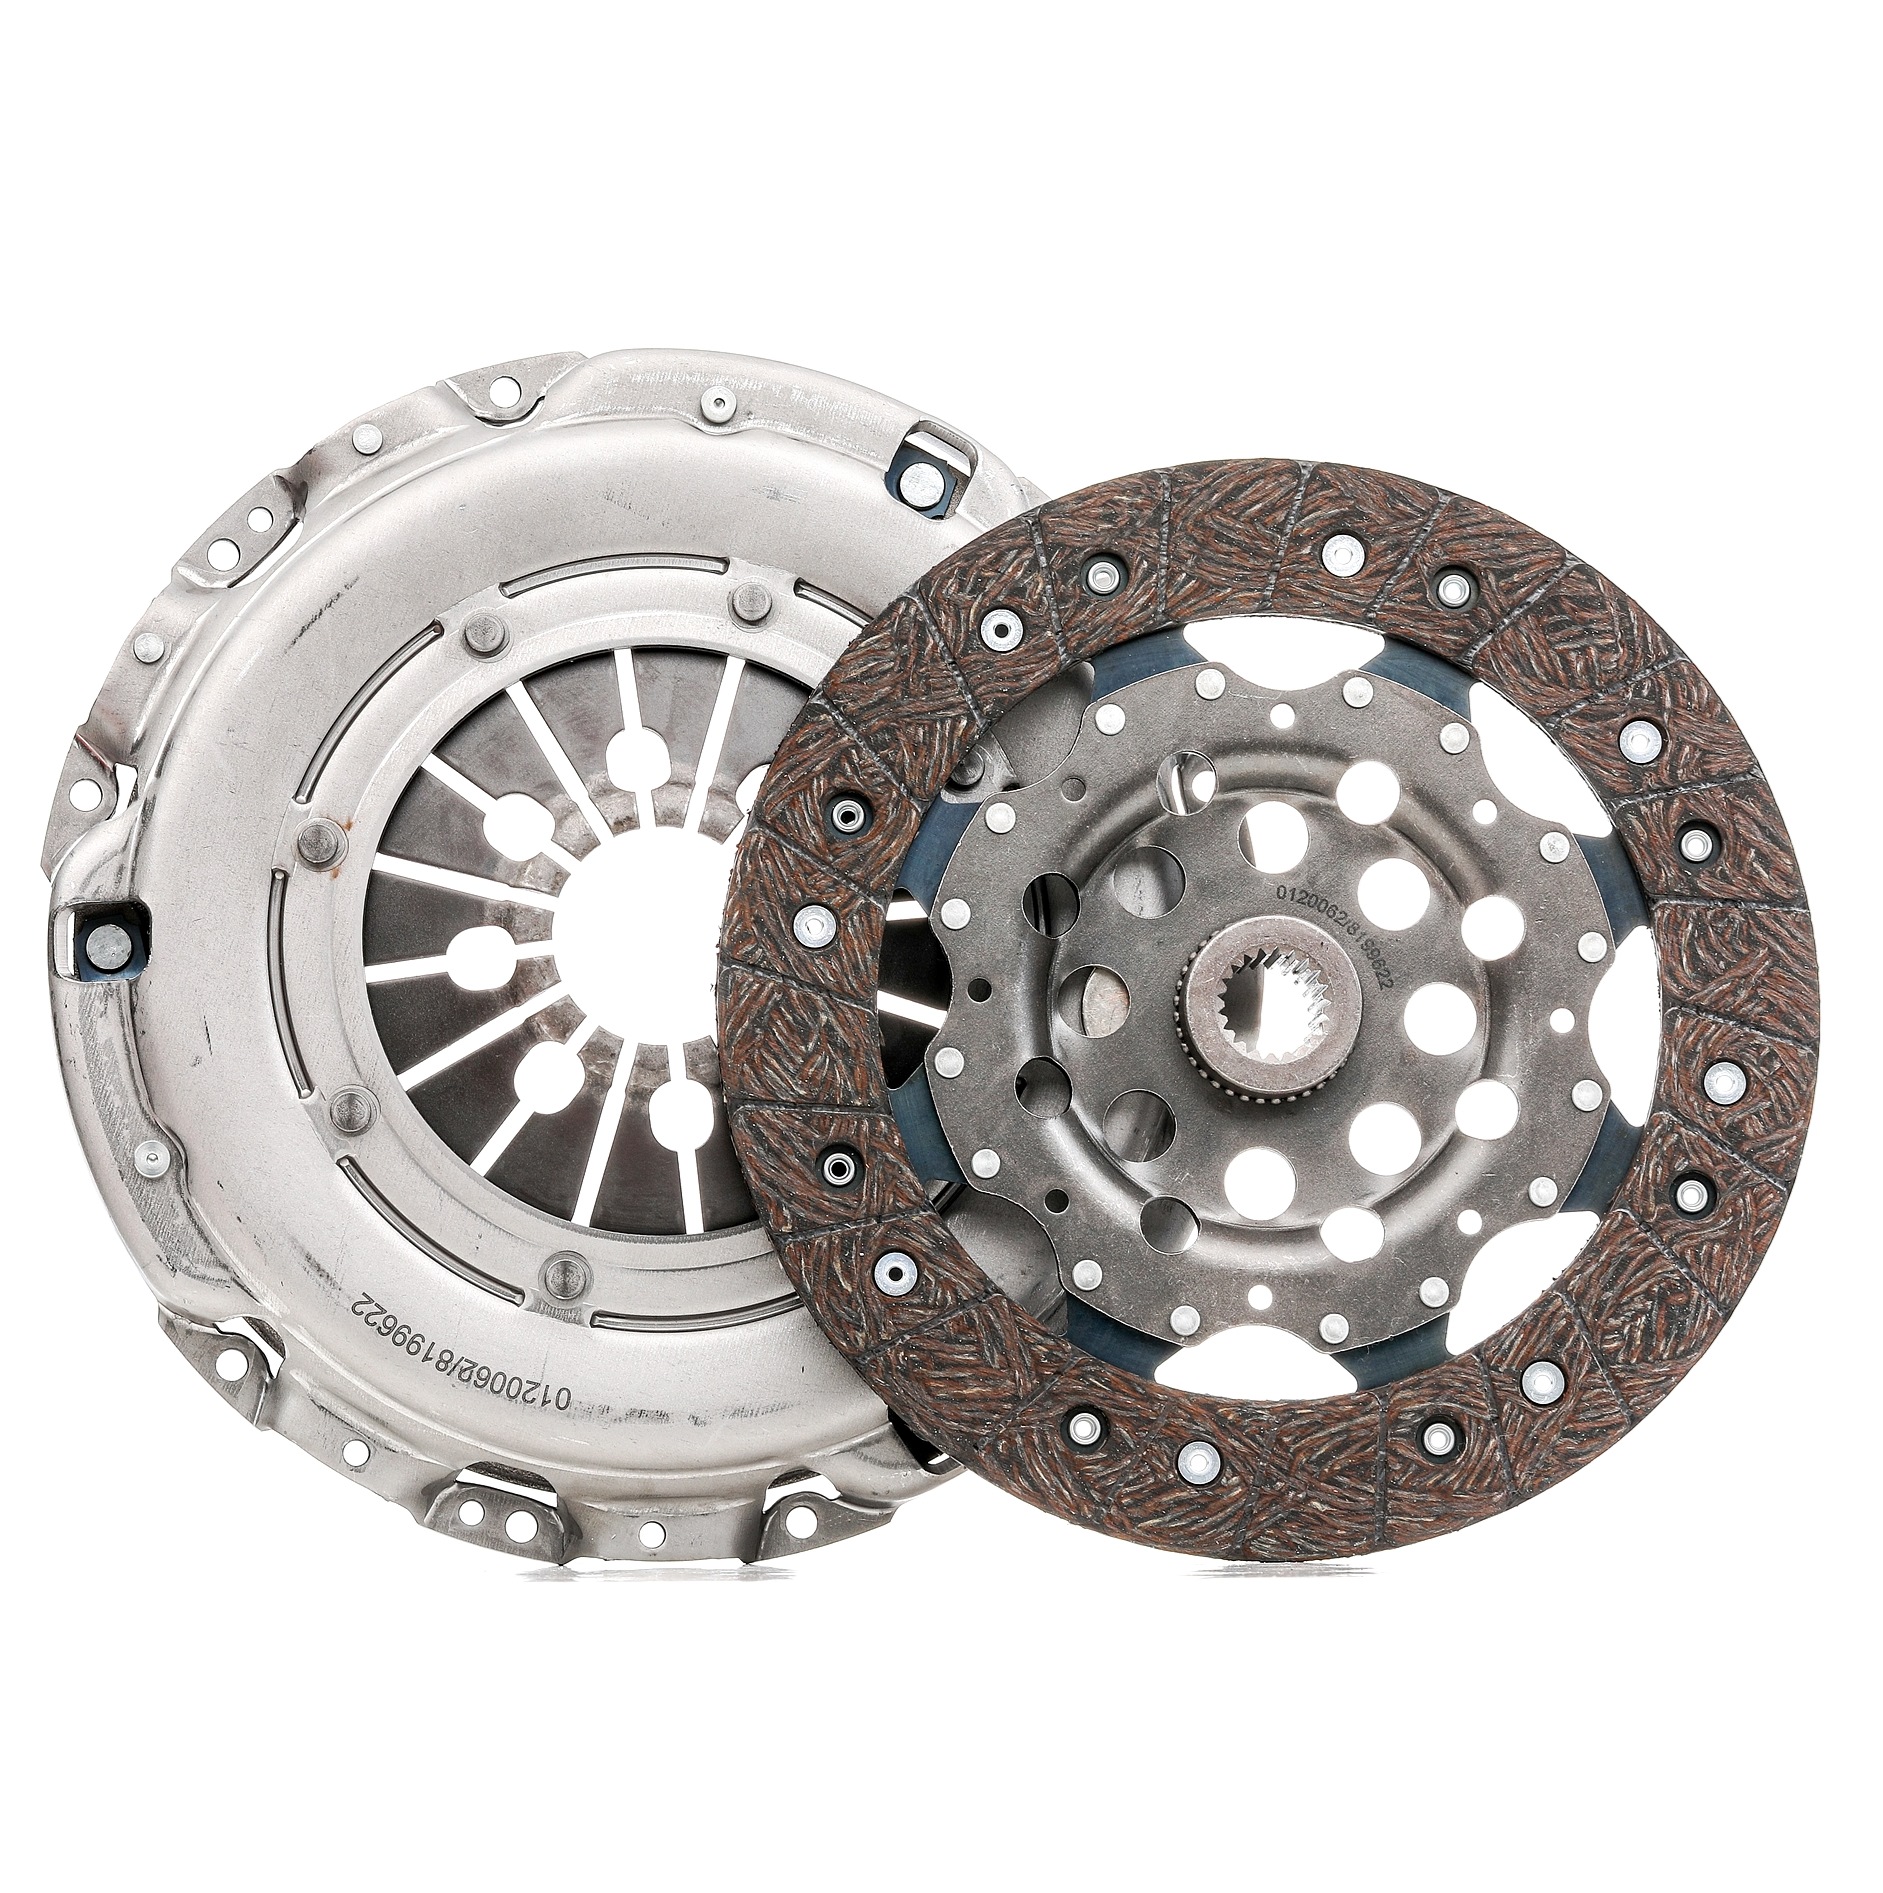 STARK SKCK-0100222 Clutch kit RENAULT experience and price